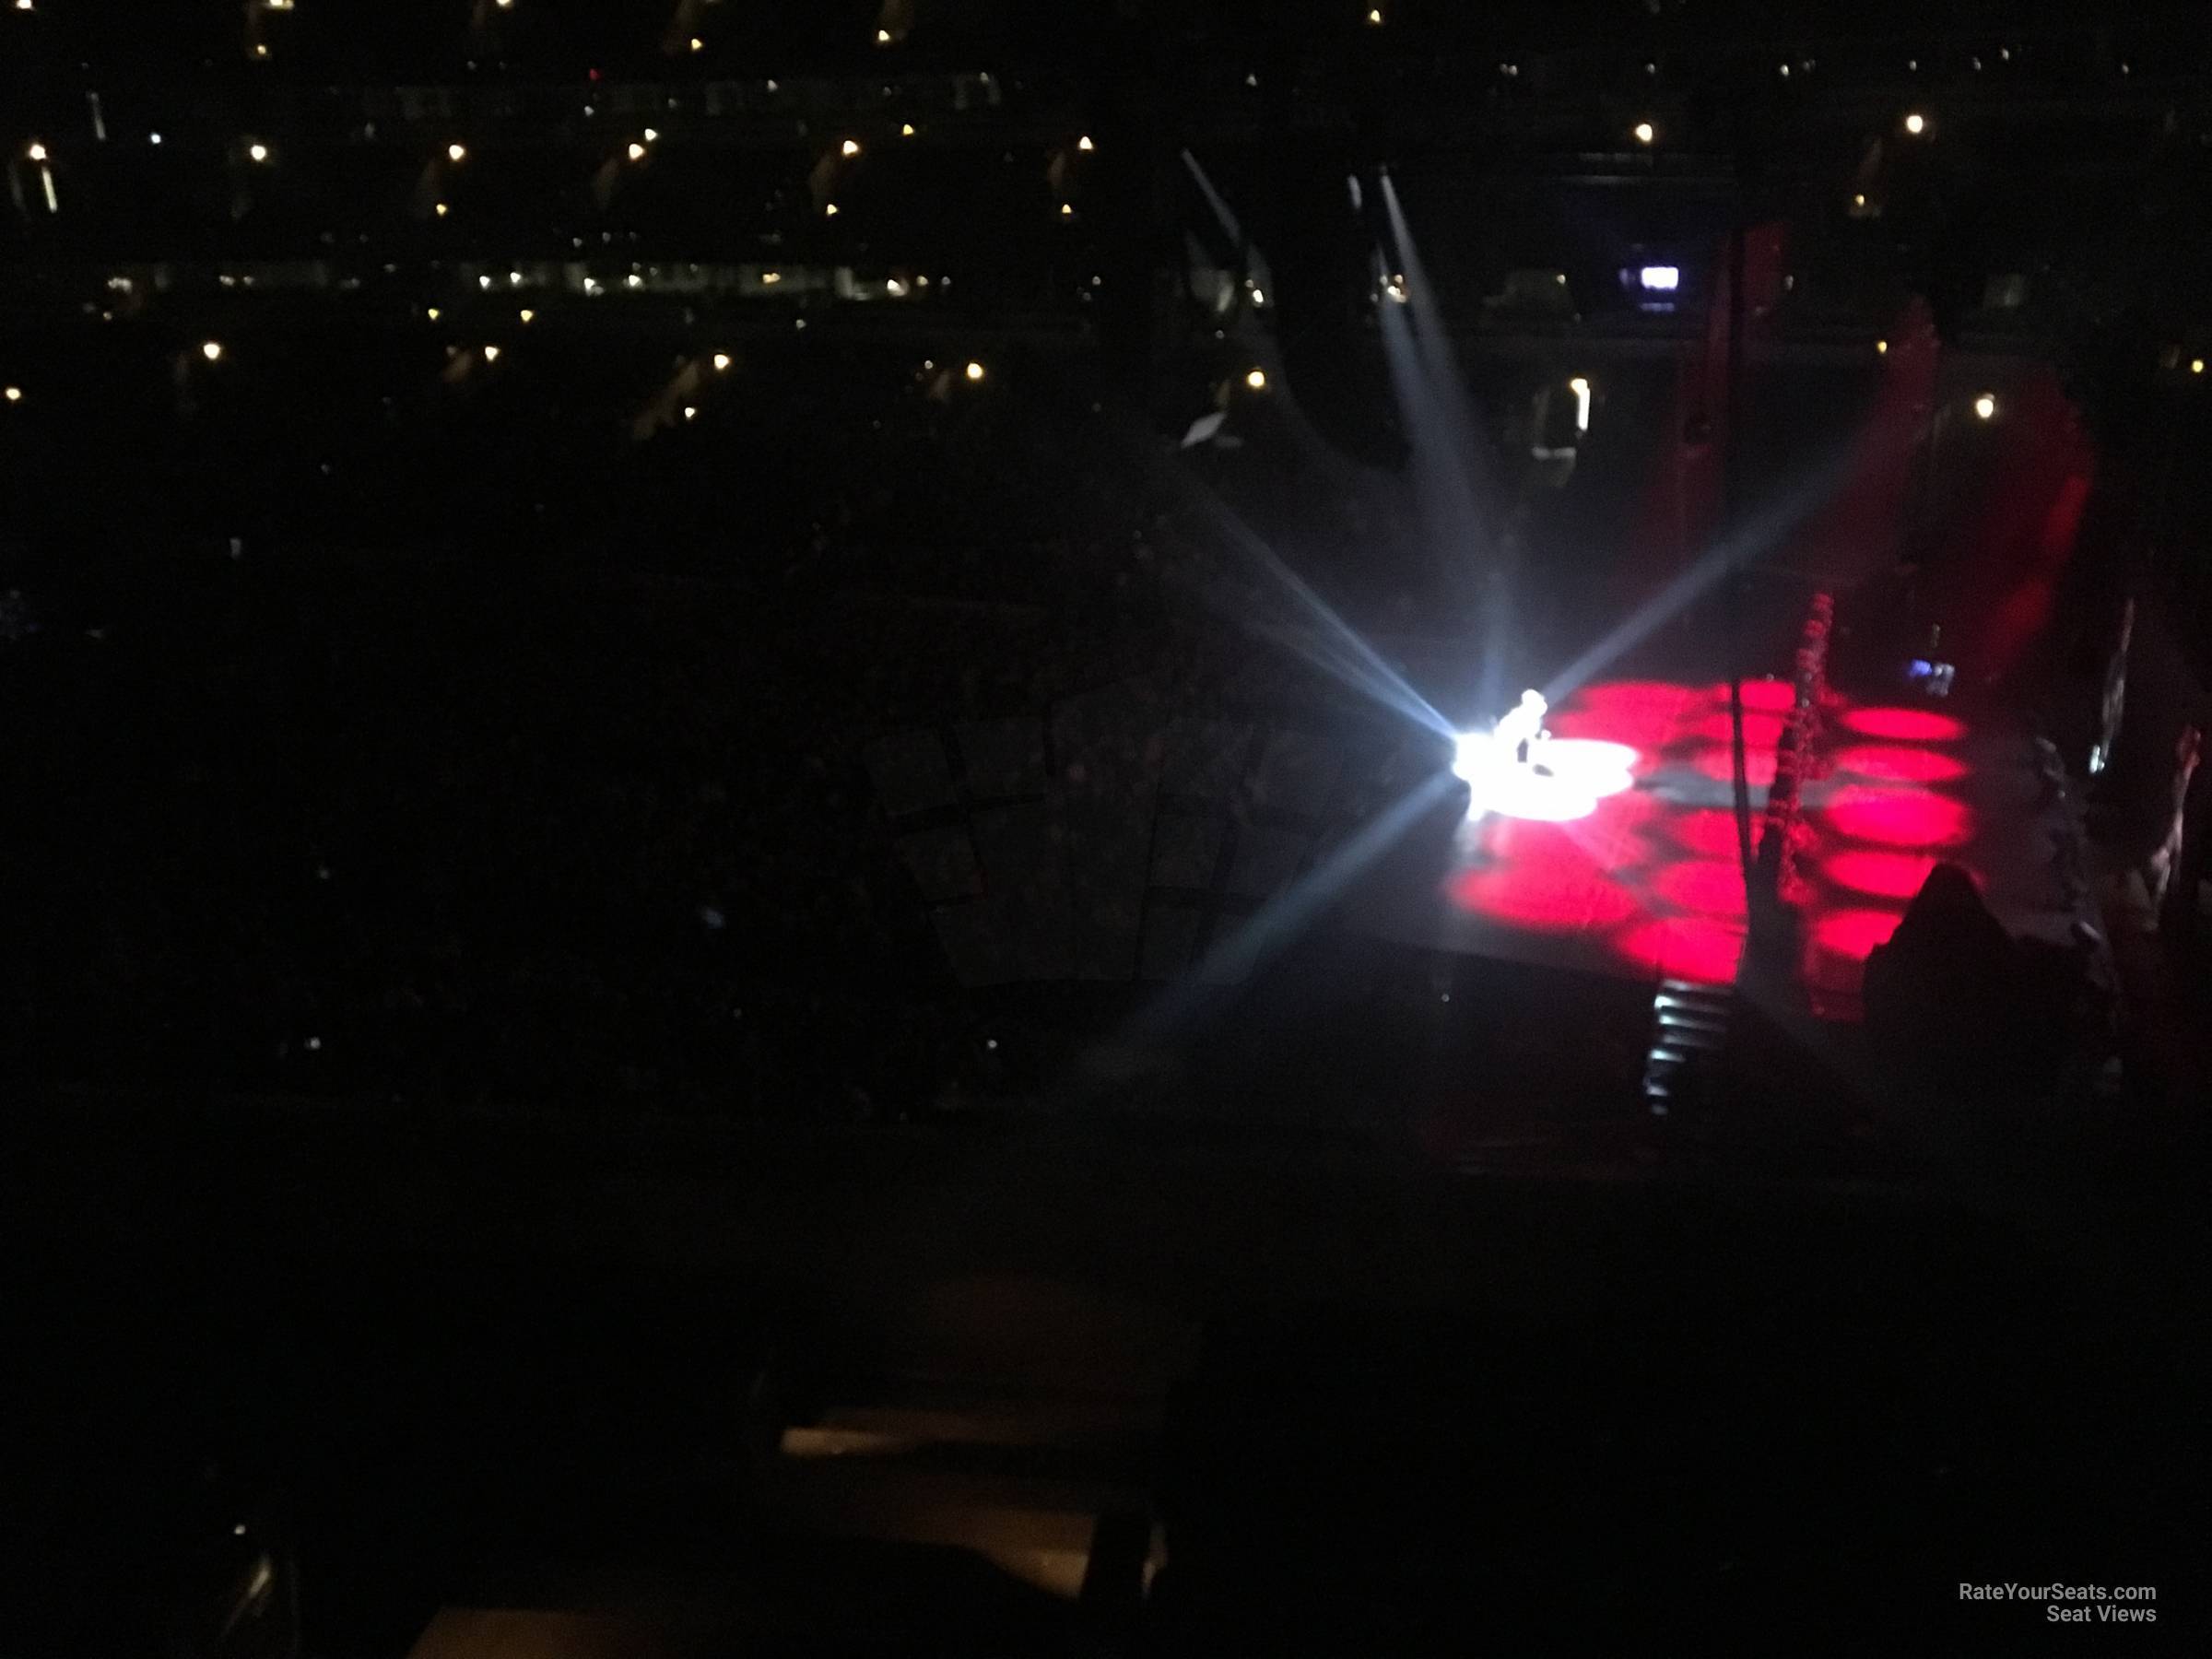 section 231, row 4 seat view  for concert - united center